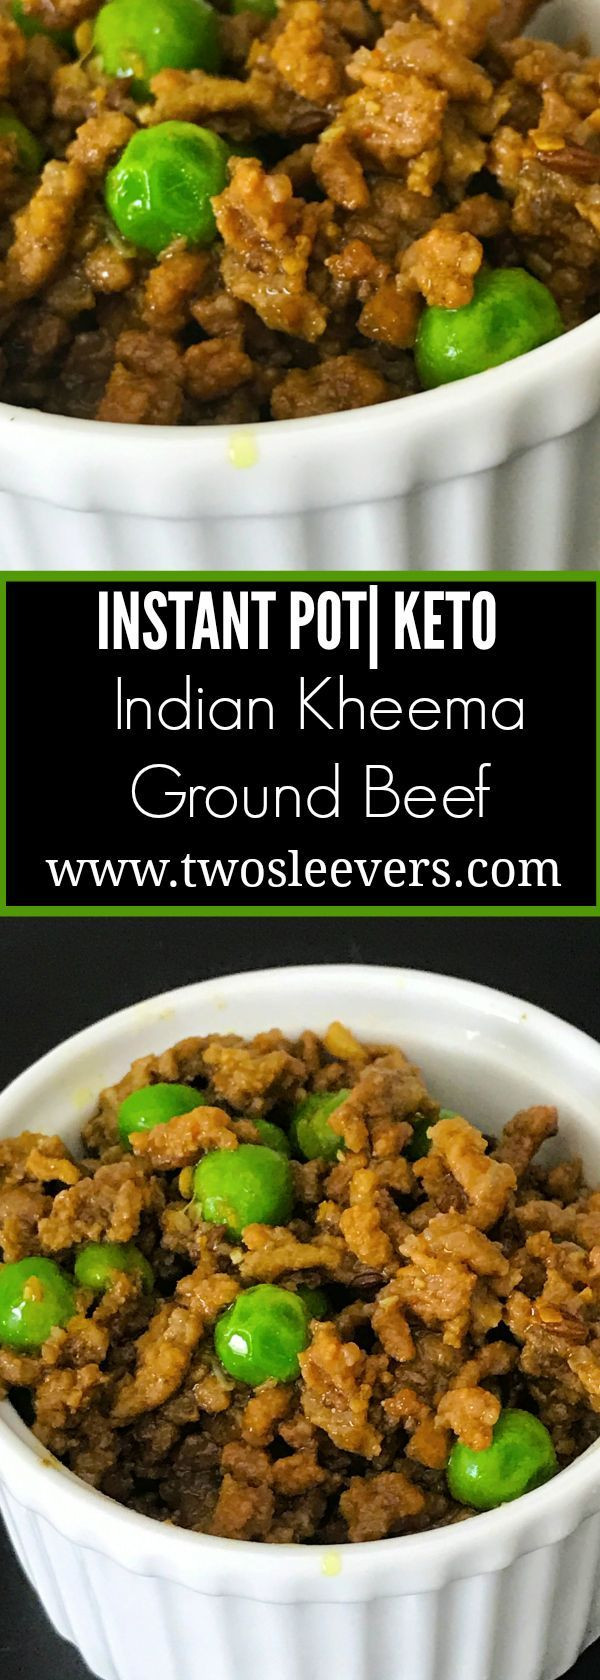 Instant Pot Keto Ground Beef Recipes
 Instant Pot Keto Indian Kheema Easy low carb recipe for